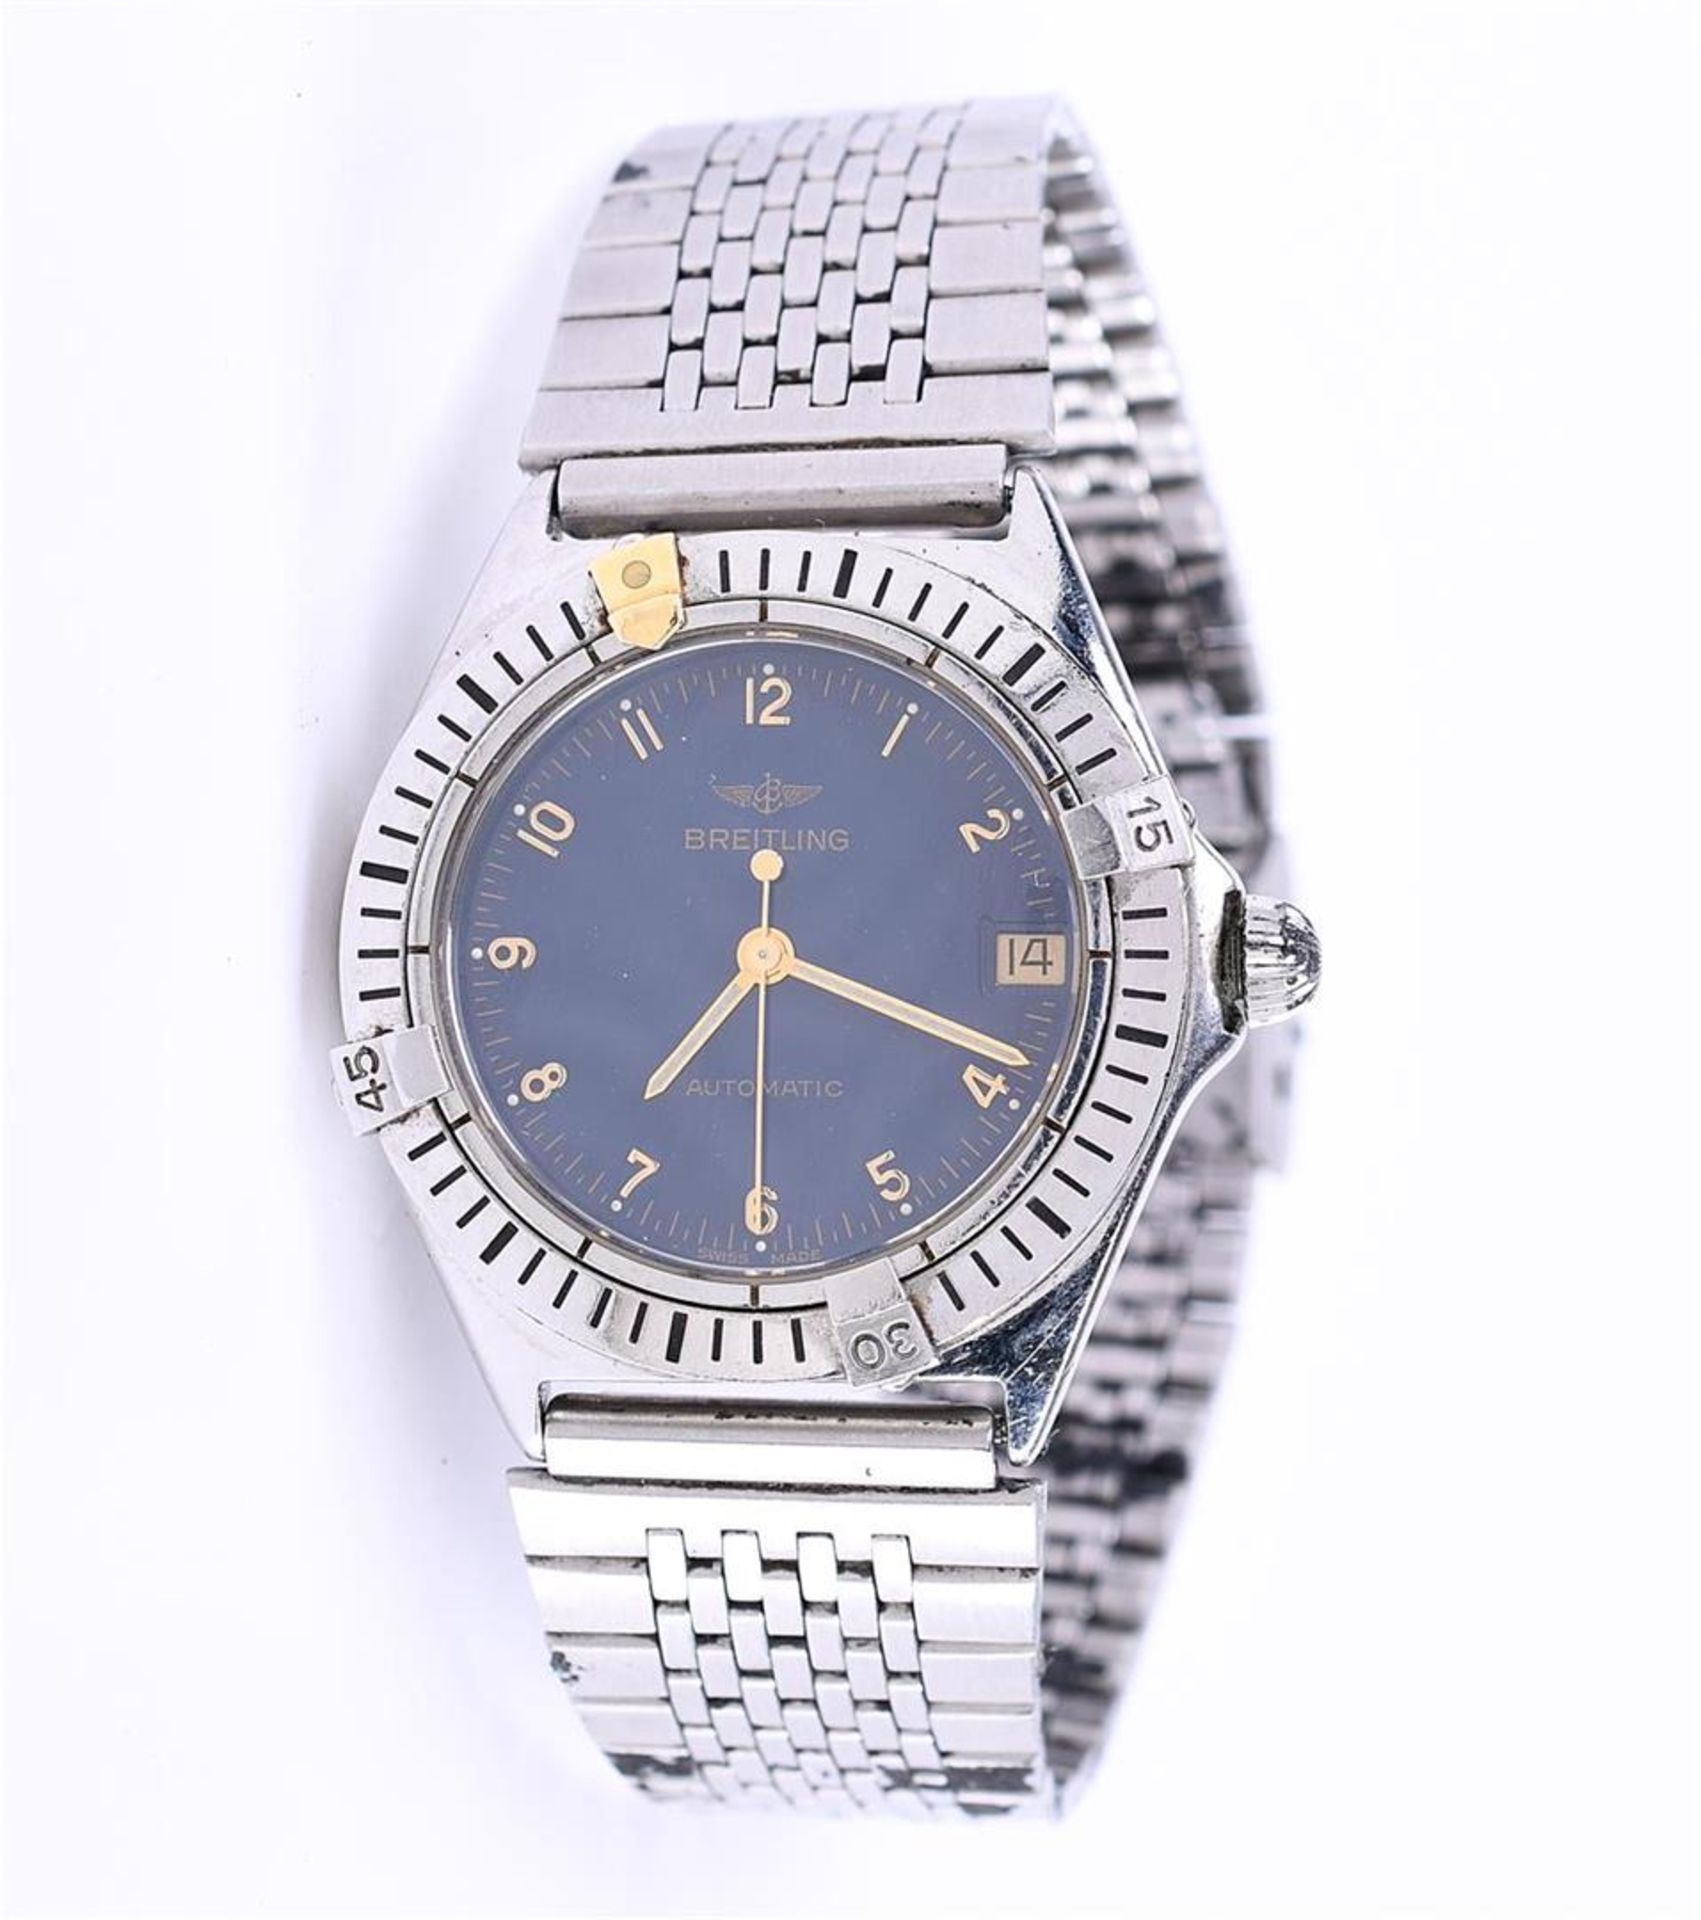 Breitling Callistino. The blue dial has Arabic numerals and date indication